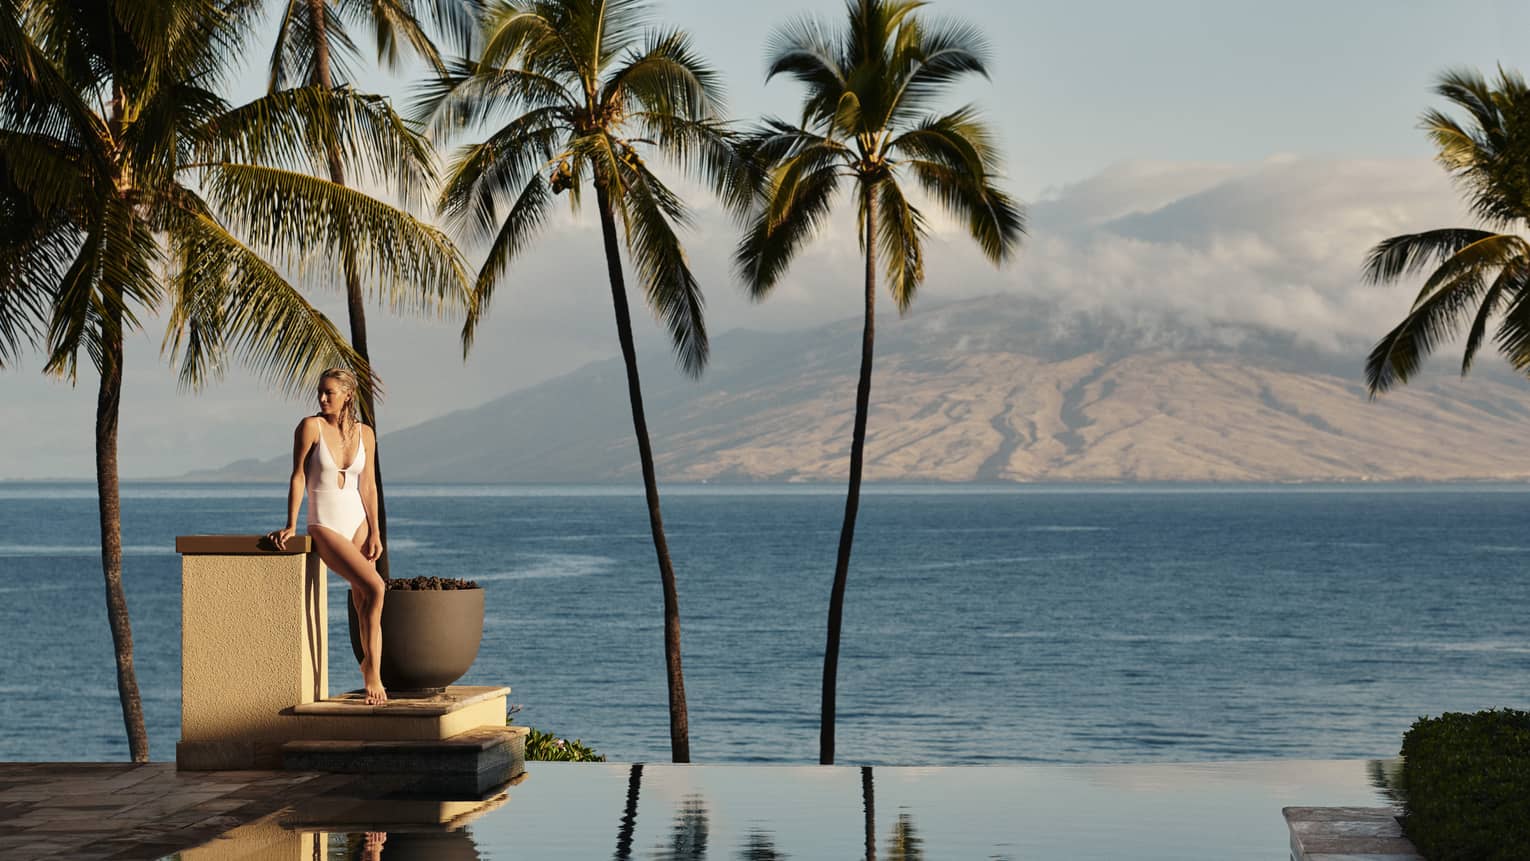 Woman stands on edge of infinity pool in Maui